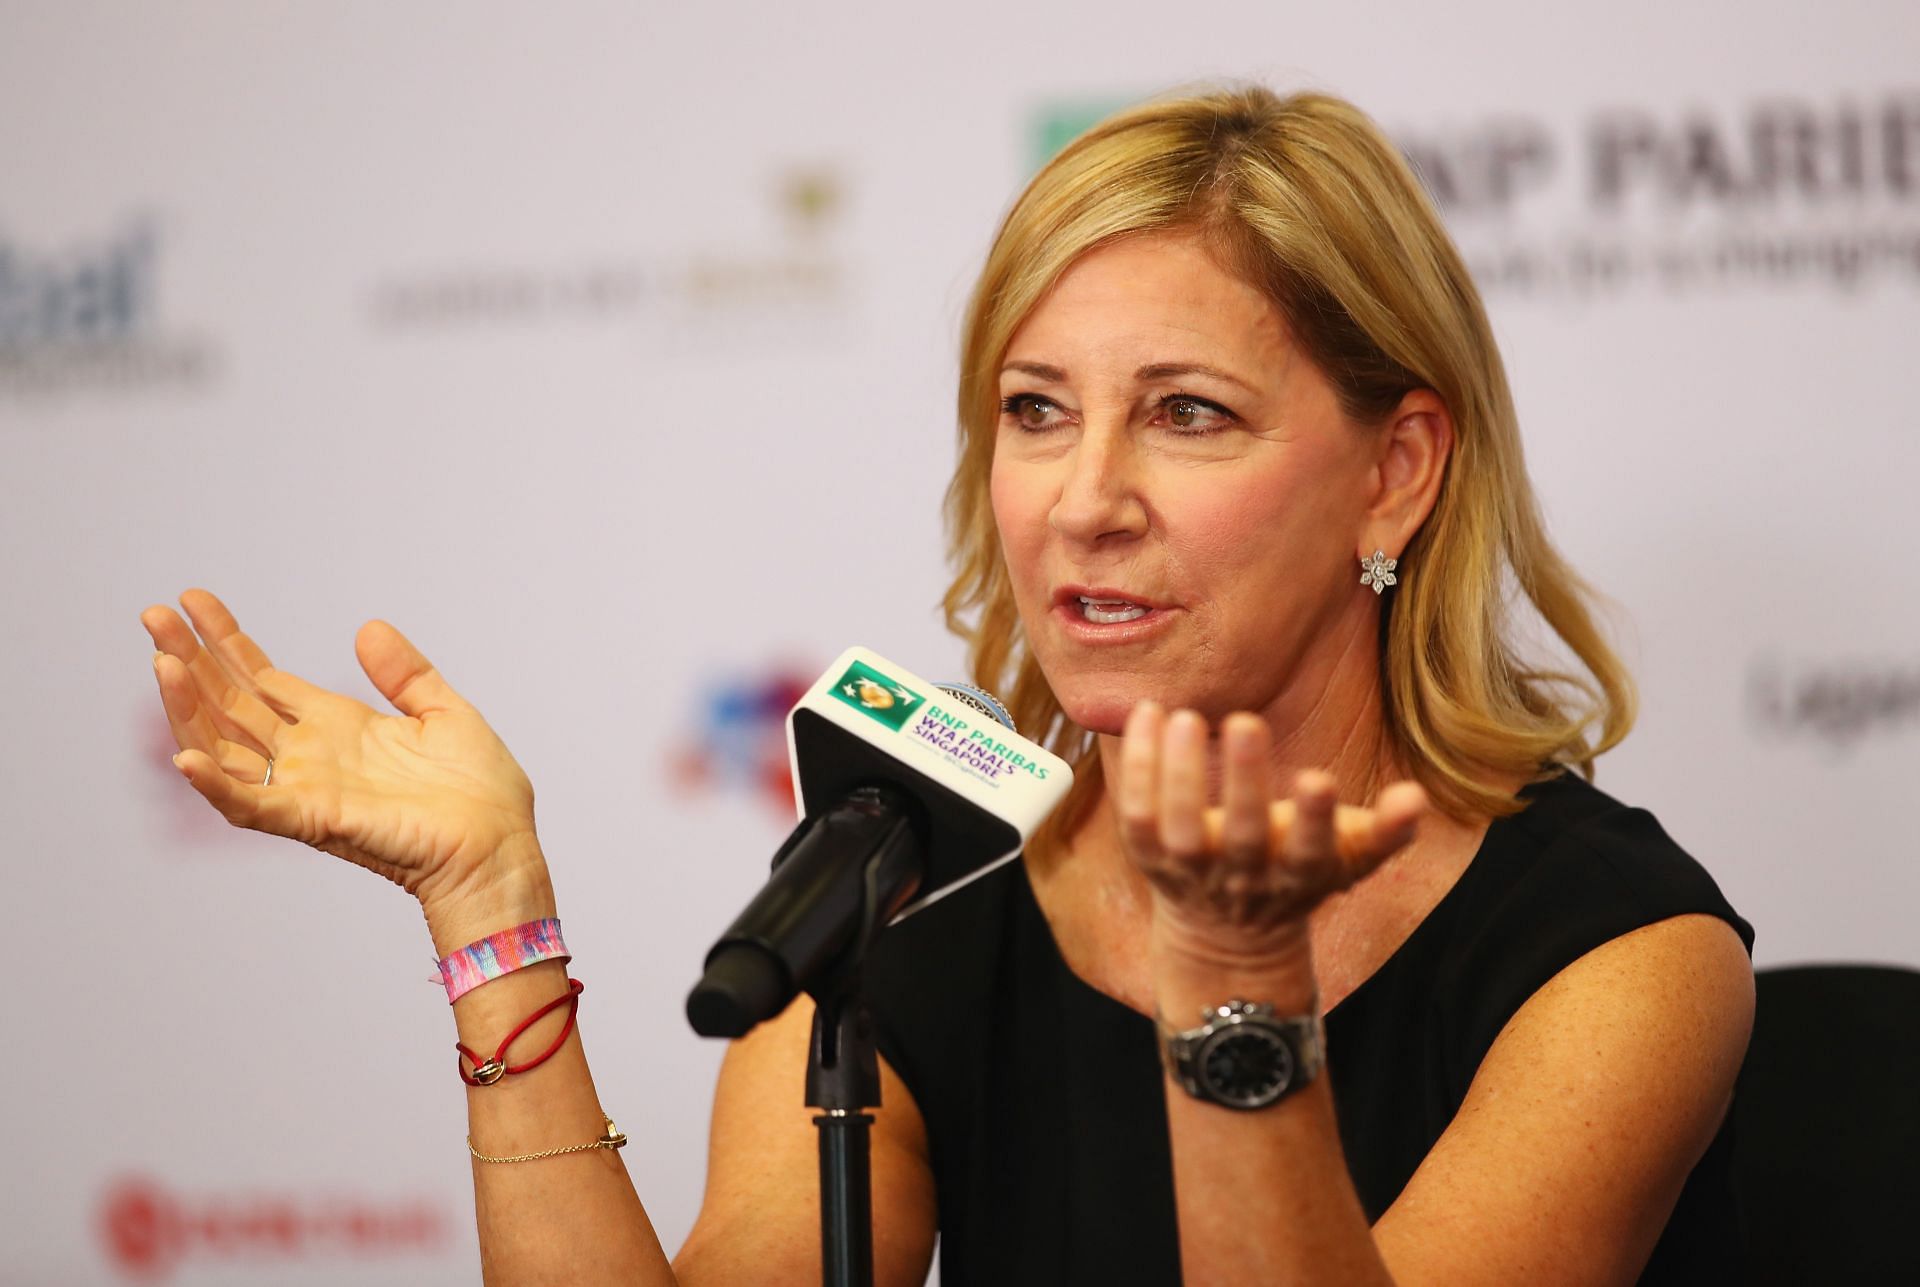 Chris Evert shares her support for Prince Harry